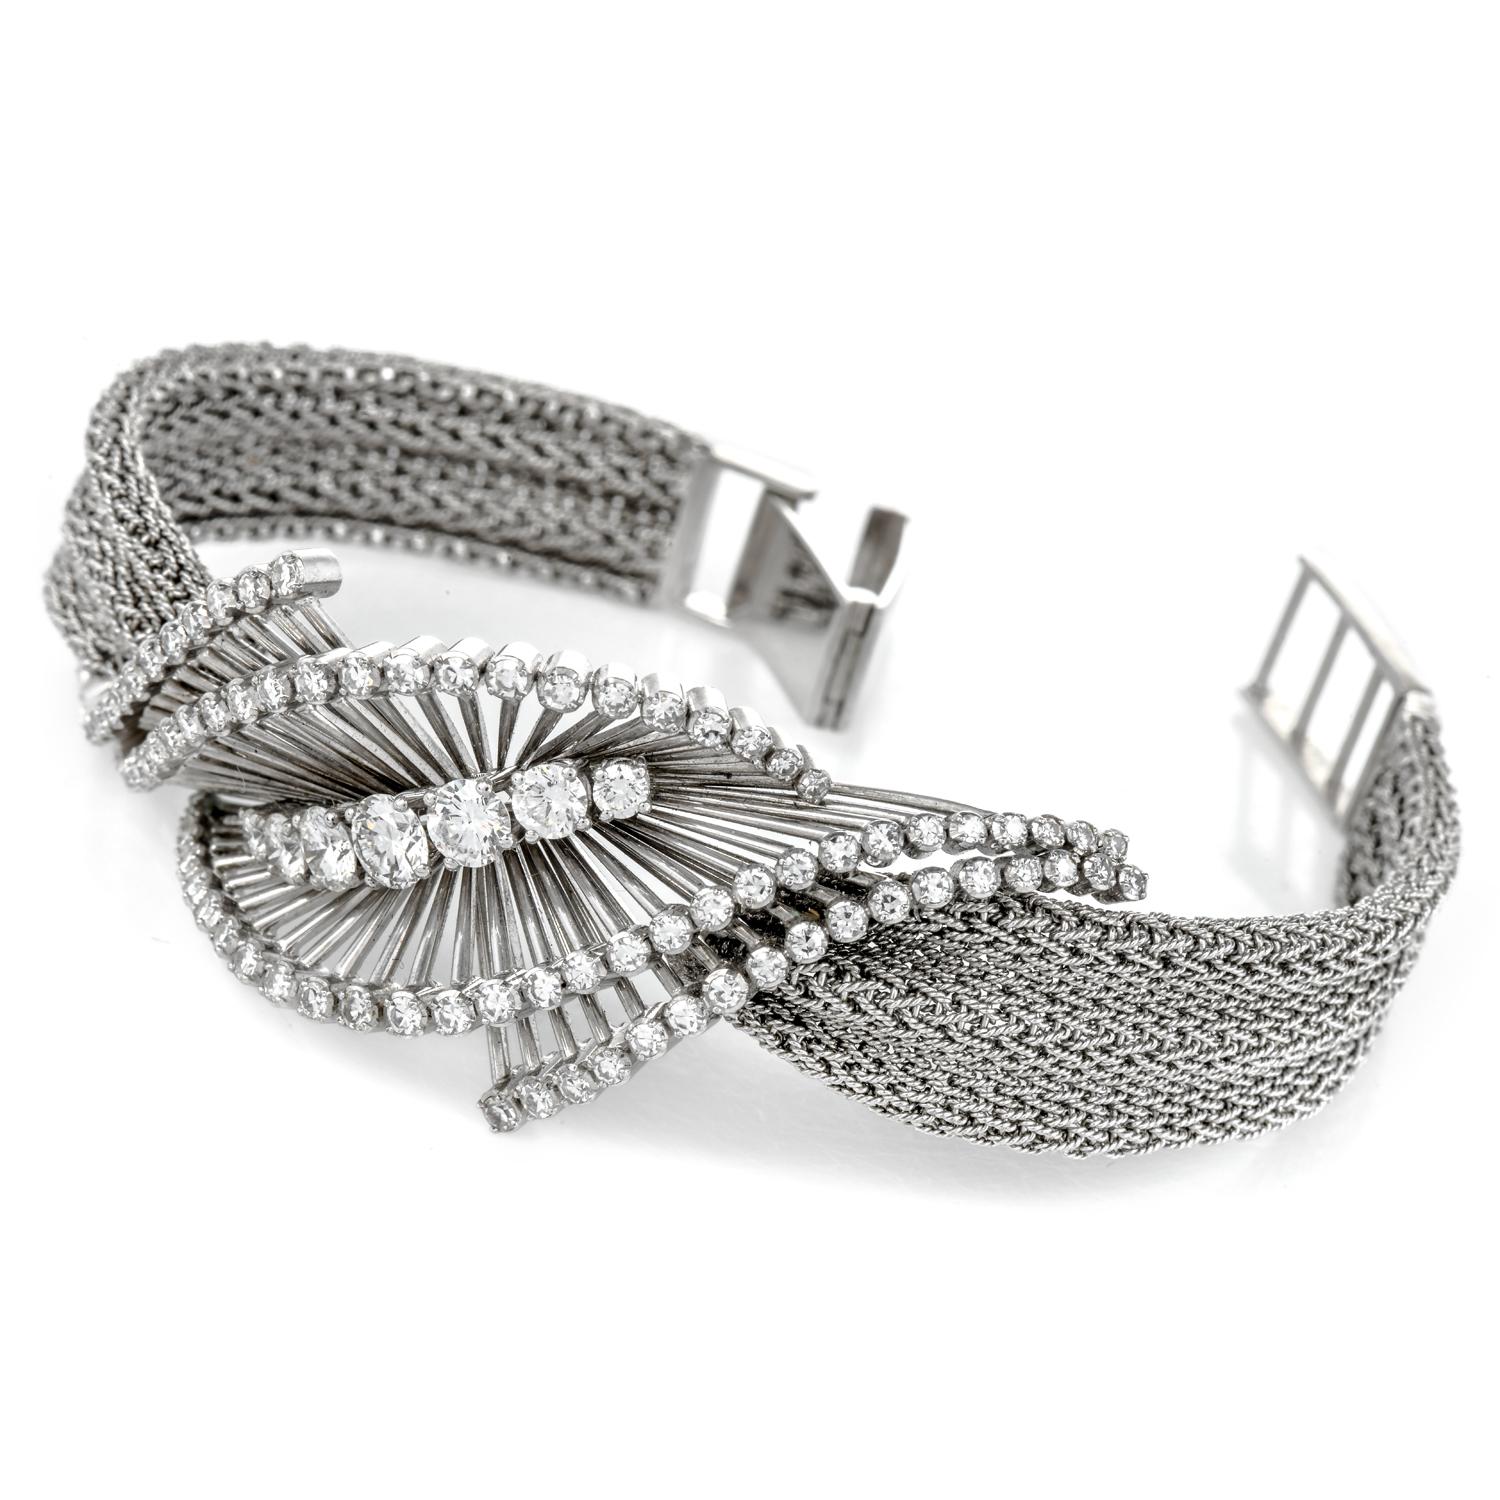 This beautiful vintage Diamond 18K White Gold Bypass Mesh Retro Bracelet is the wild card for any collection.

The edgy design features 92 smaller Round Cut Diamonds, weighing collectively 1.30 graded G-H color and VS1-VS2 clarity.

Centered by 7